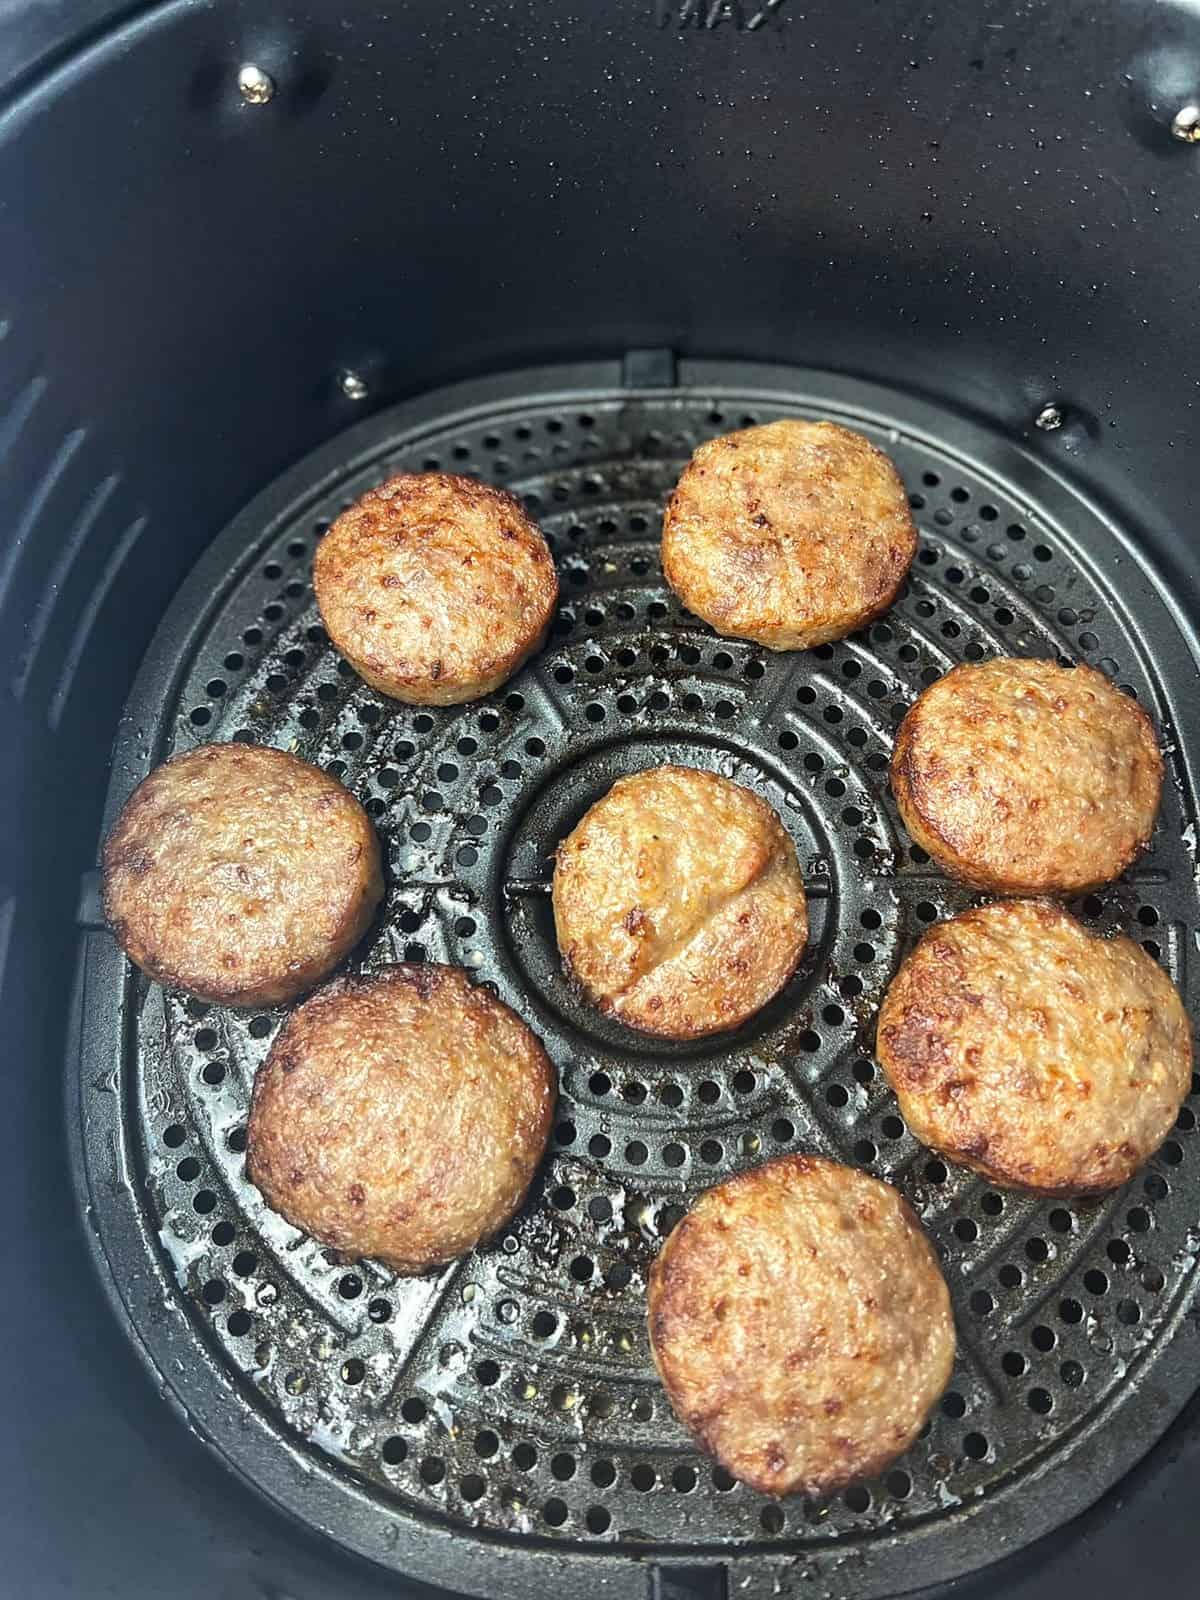 cooked and shown in air fryer basket.